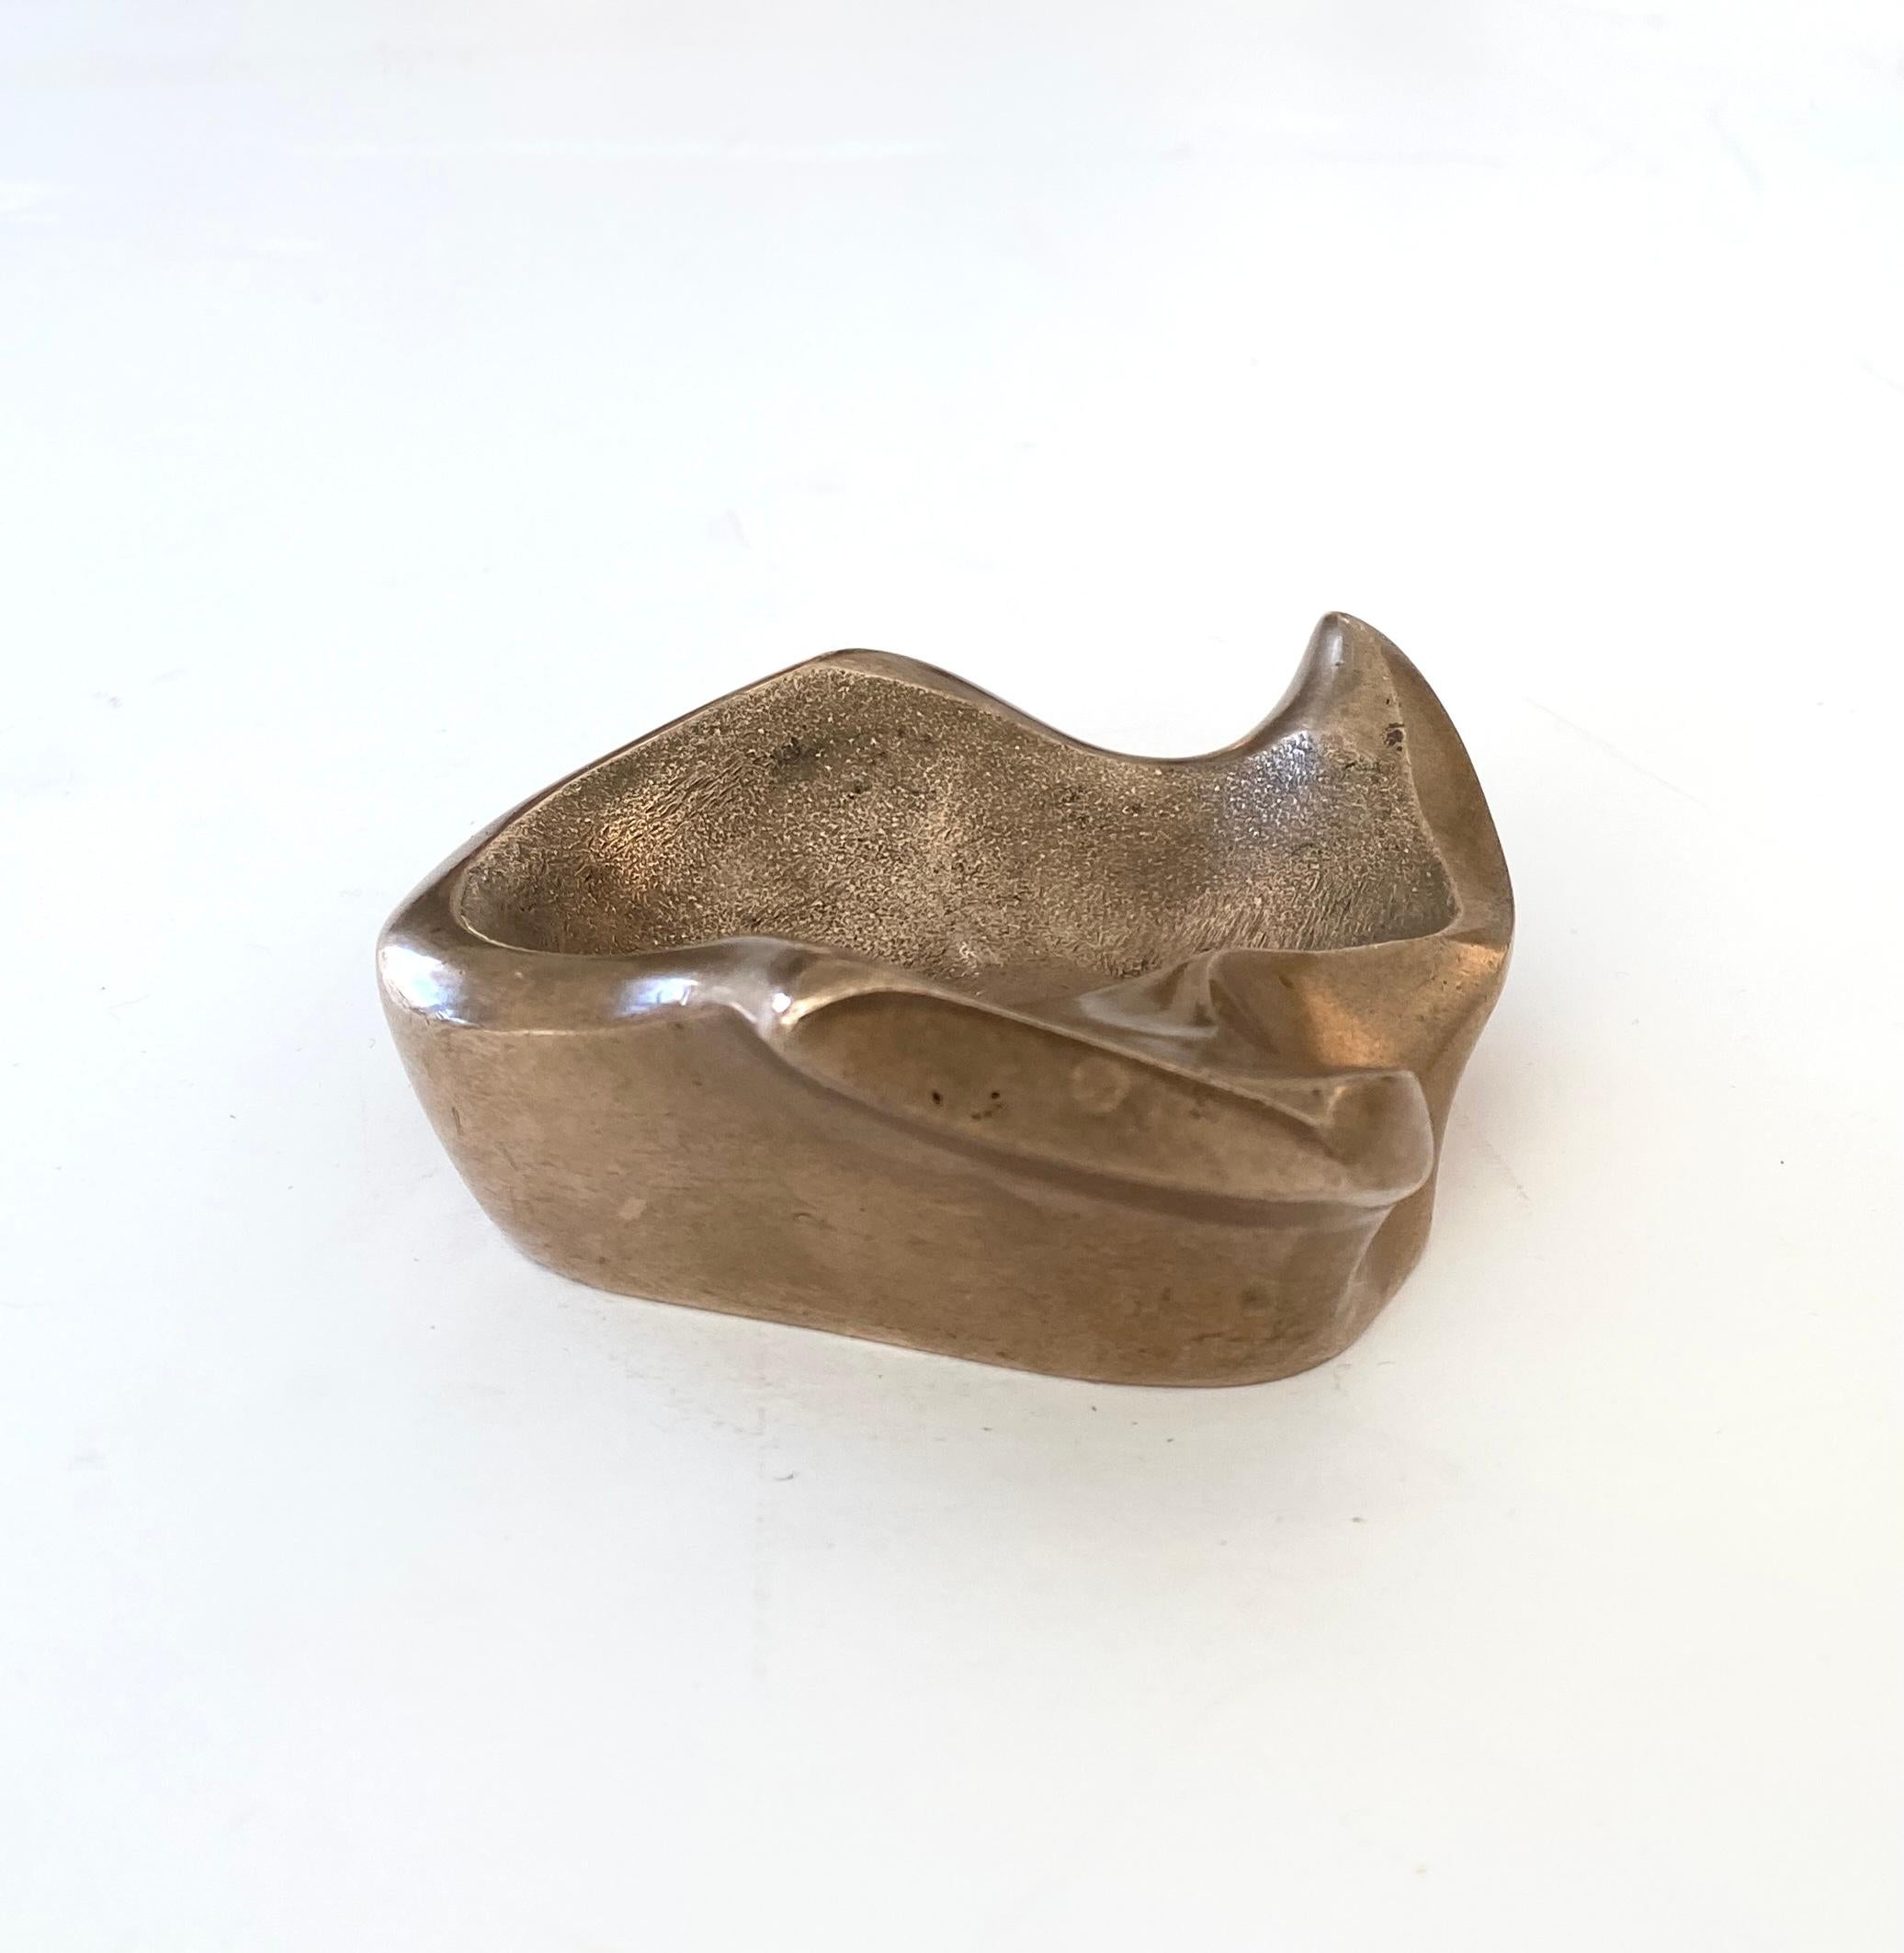 Michel Jaubert abstract sculptural bronze vide poche or dish. Michel Jaubert was well known for his sculptural abstract lamps created in bronze in his French atelier. Also created were many abstract small sculptures but more rare. 
Signed M Jaubert.